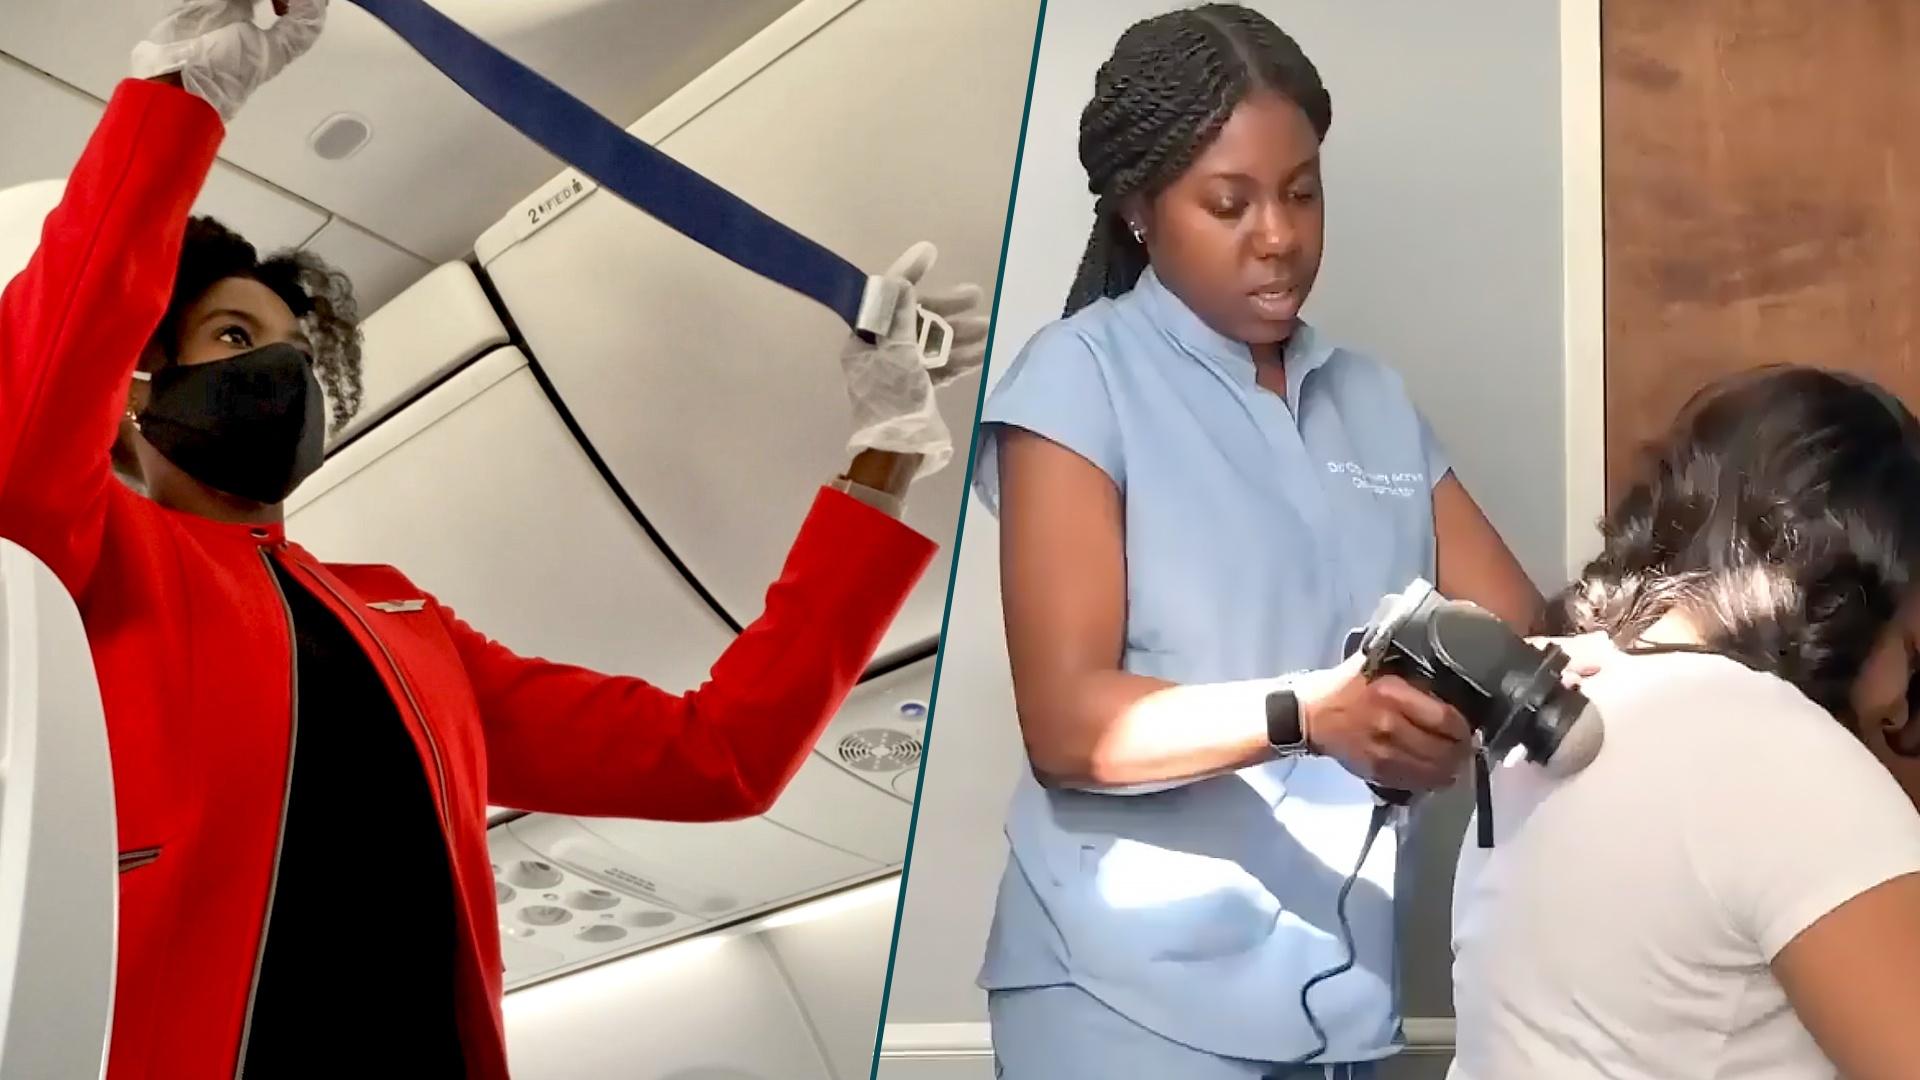 A split image of Courtney, from episode 1 of the Digital Series, at her 2 jobs,  as a flight attendant (left) and as a chiropractor (right)